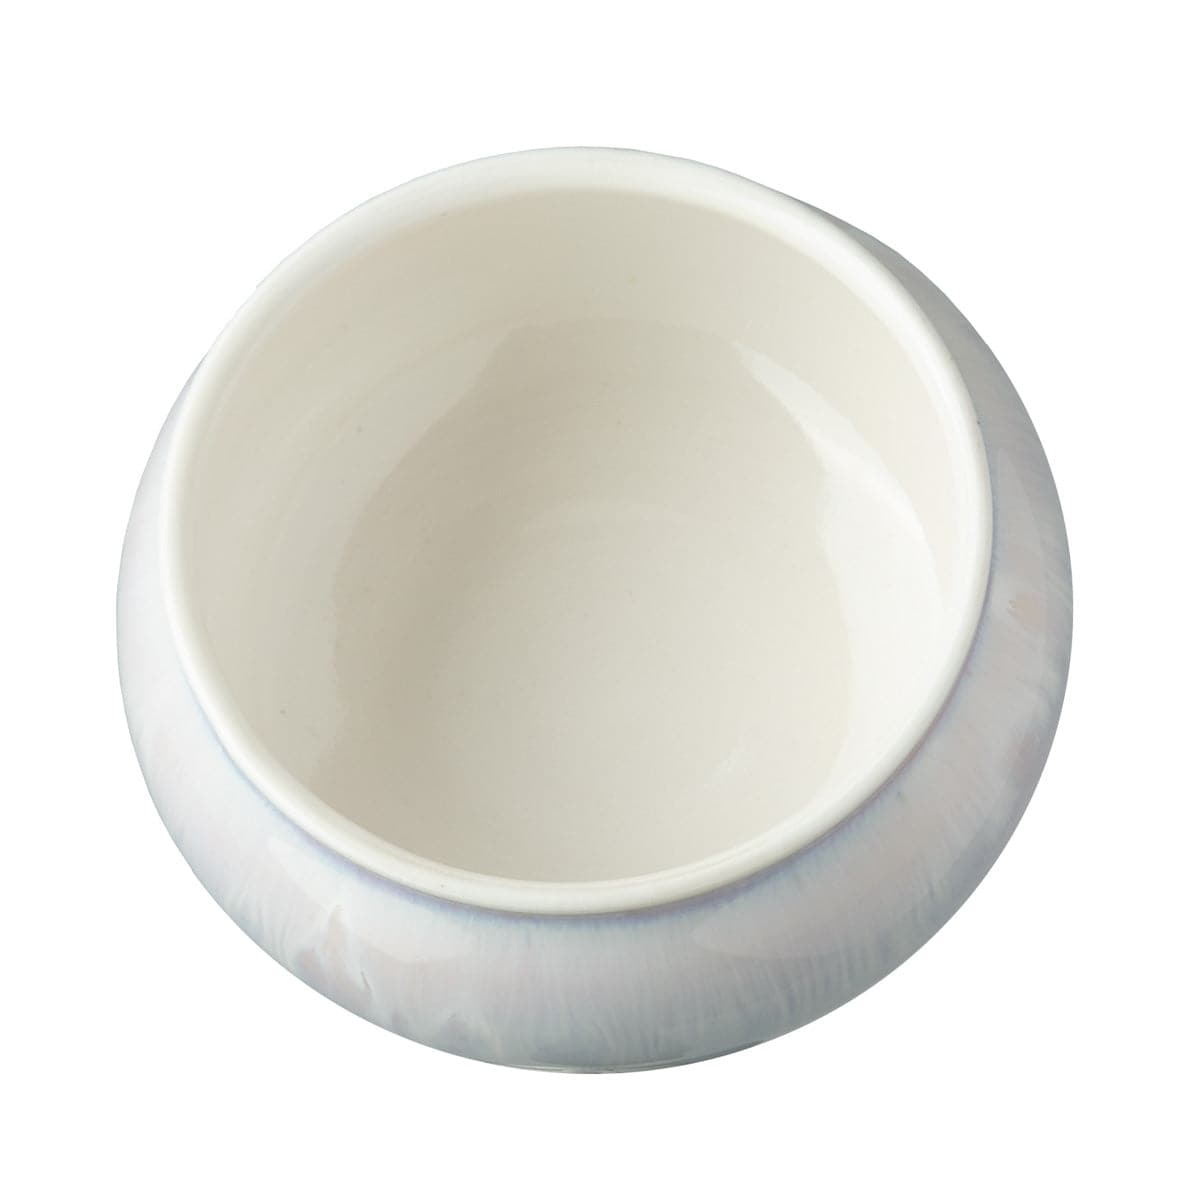 a shot showing the smooth white inside of the IN YOUR FACE BOWL